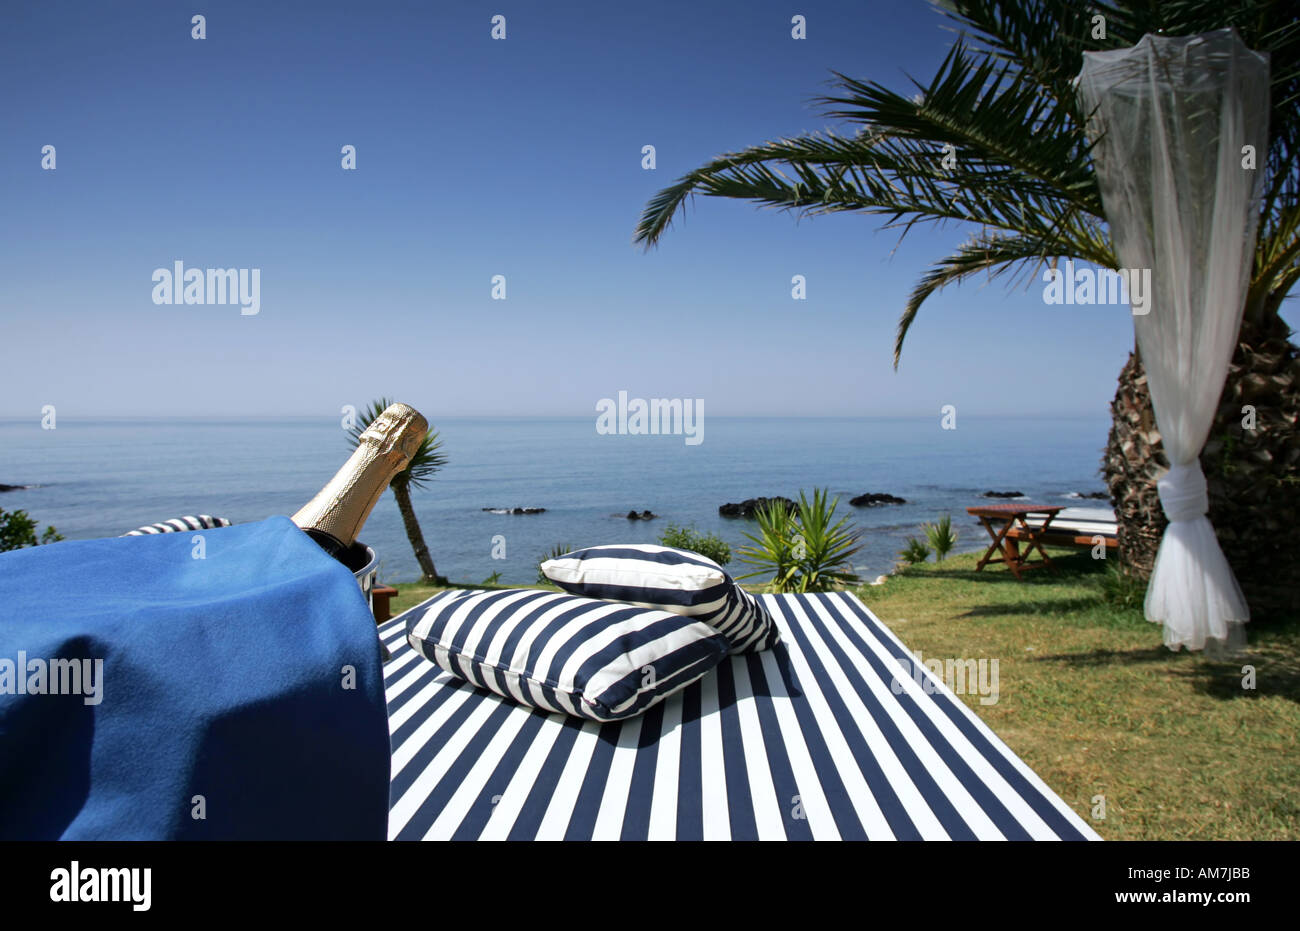 Champagne and bucket next to sunlounger overlooking Mediterranean Sea Stock Photo